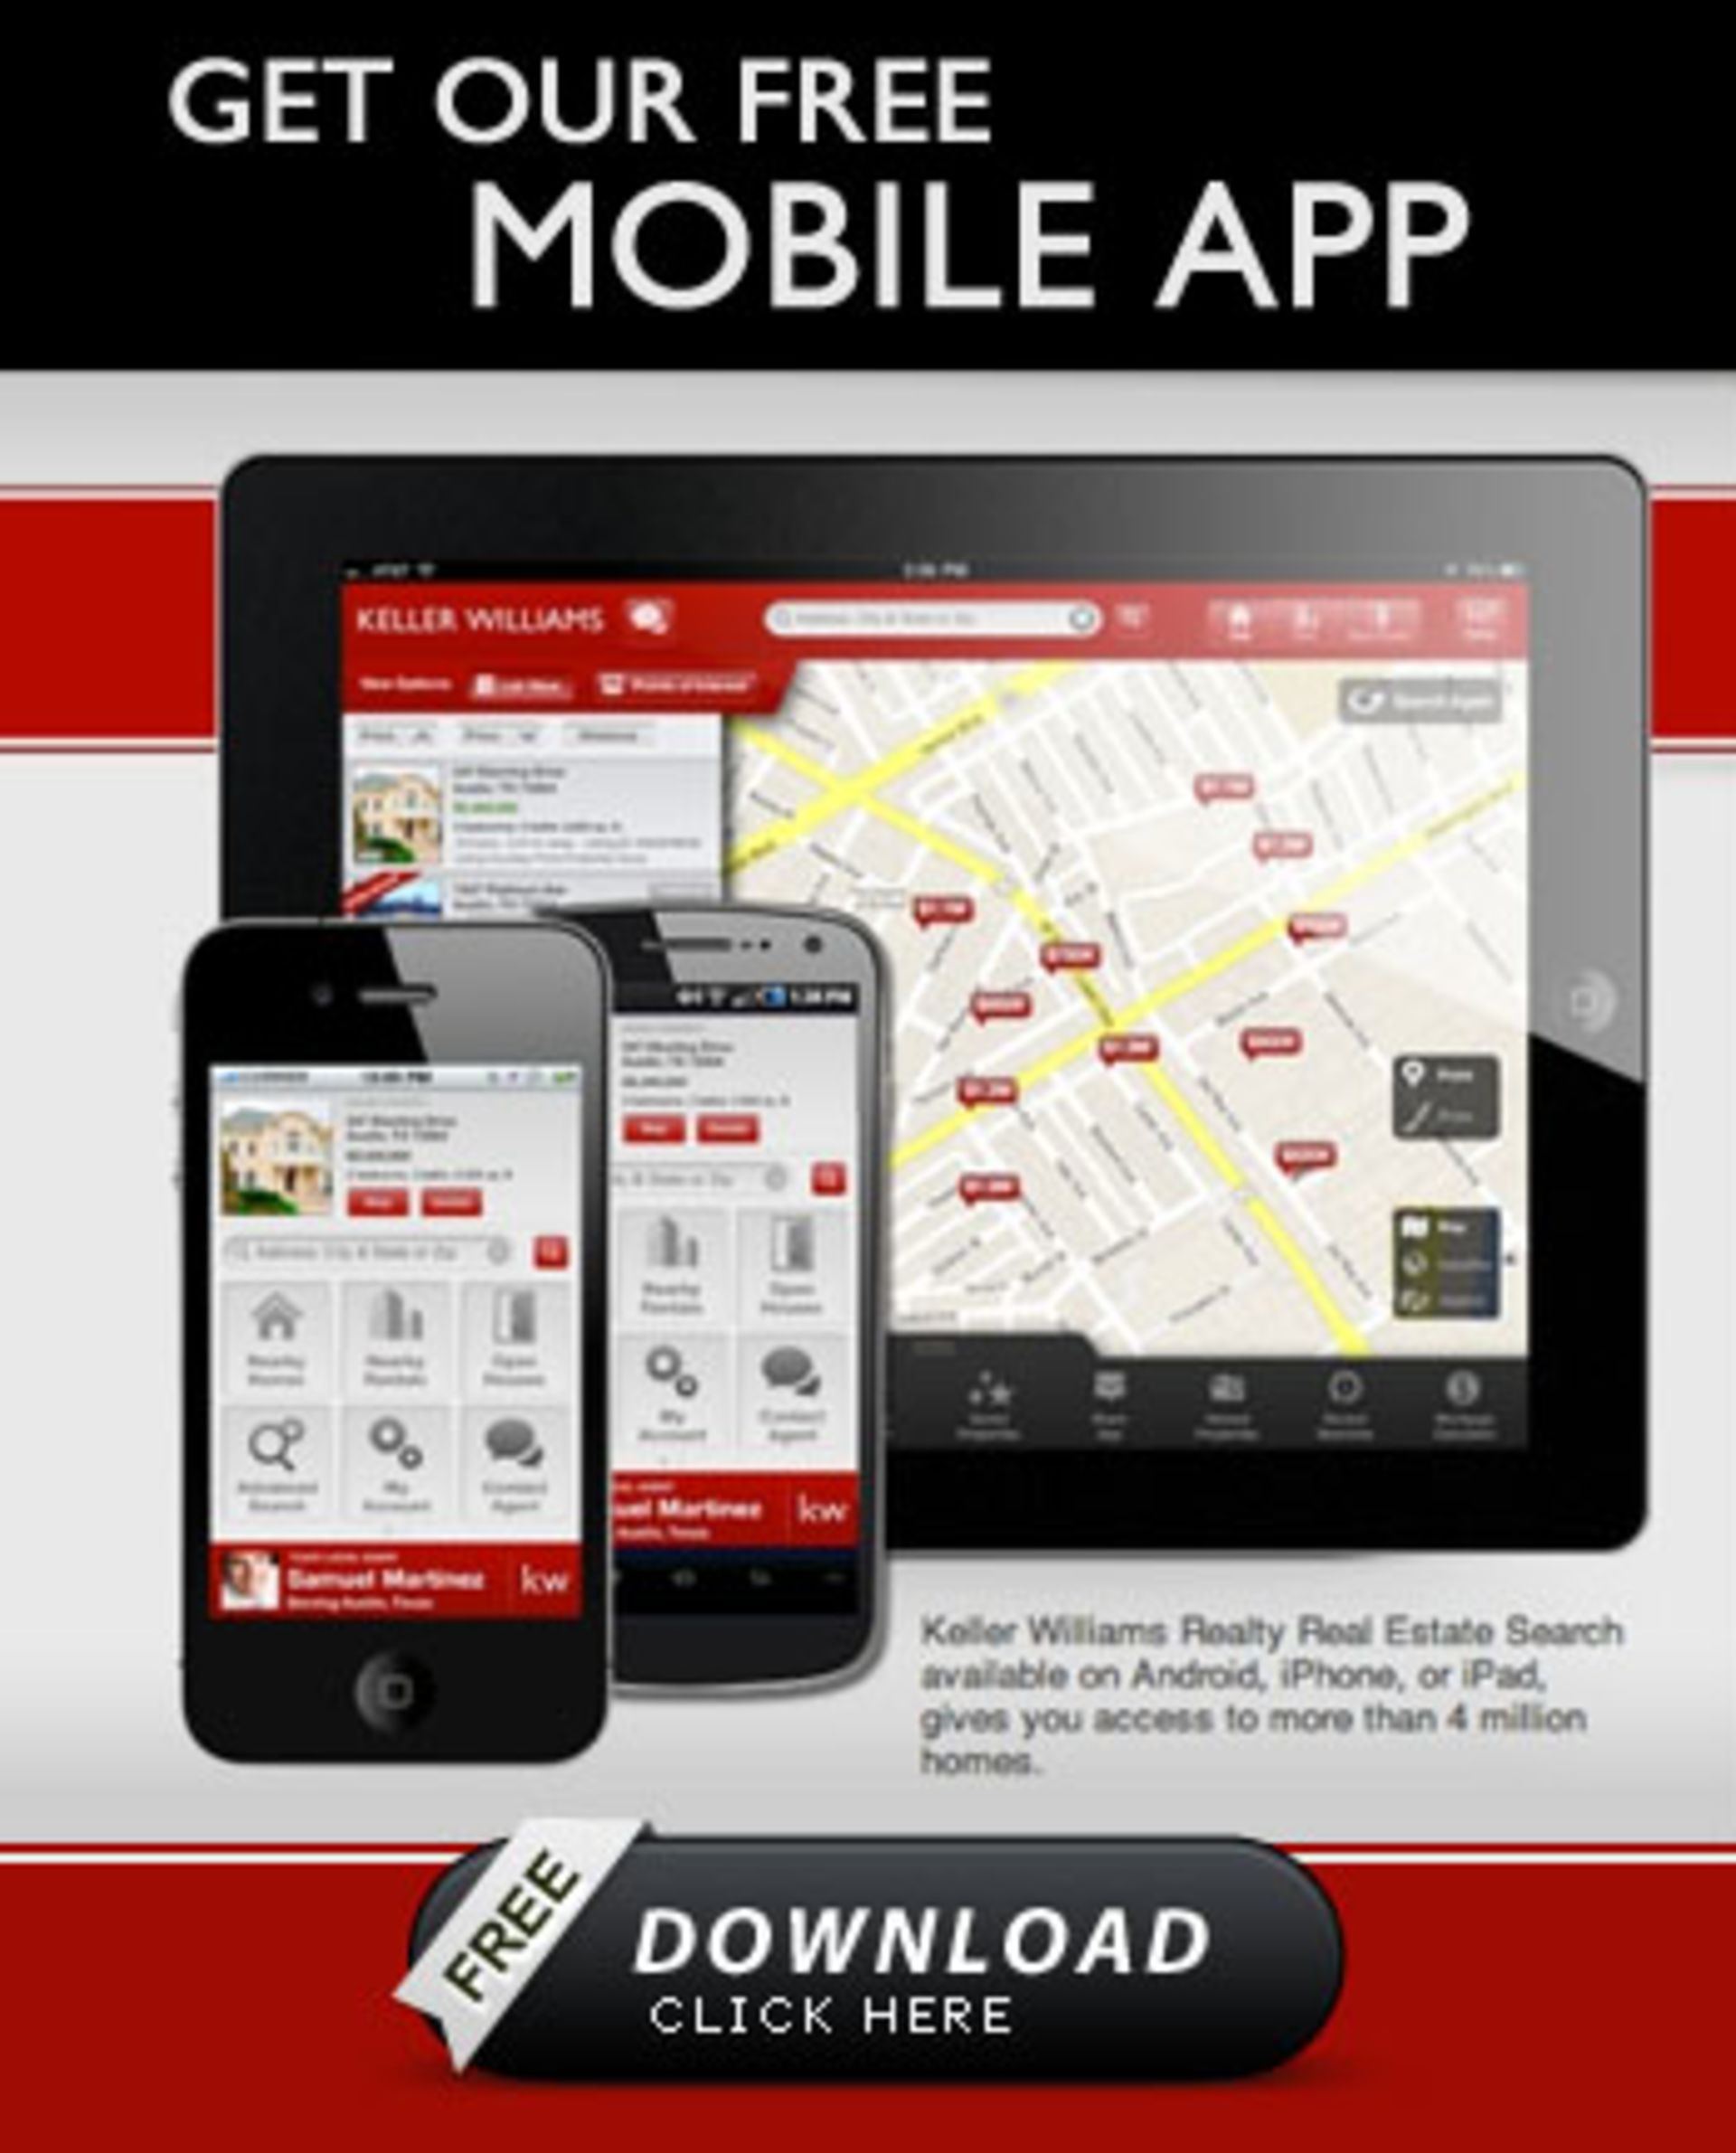 Download Our Mobile App